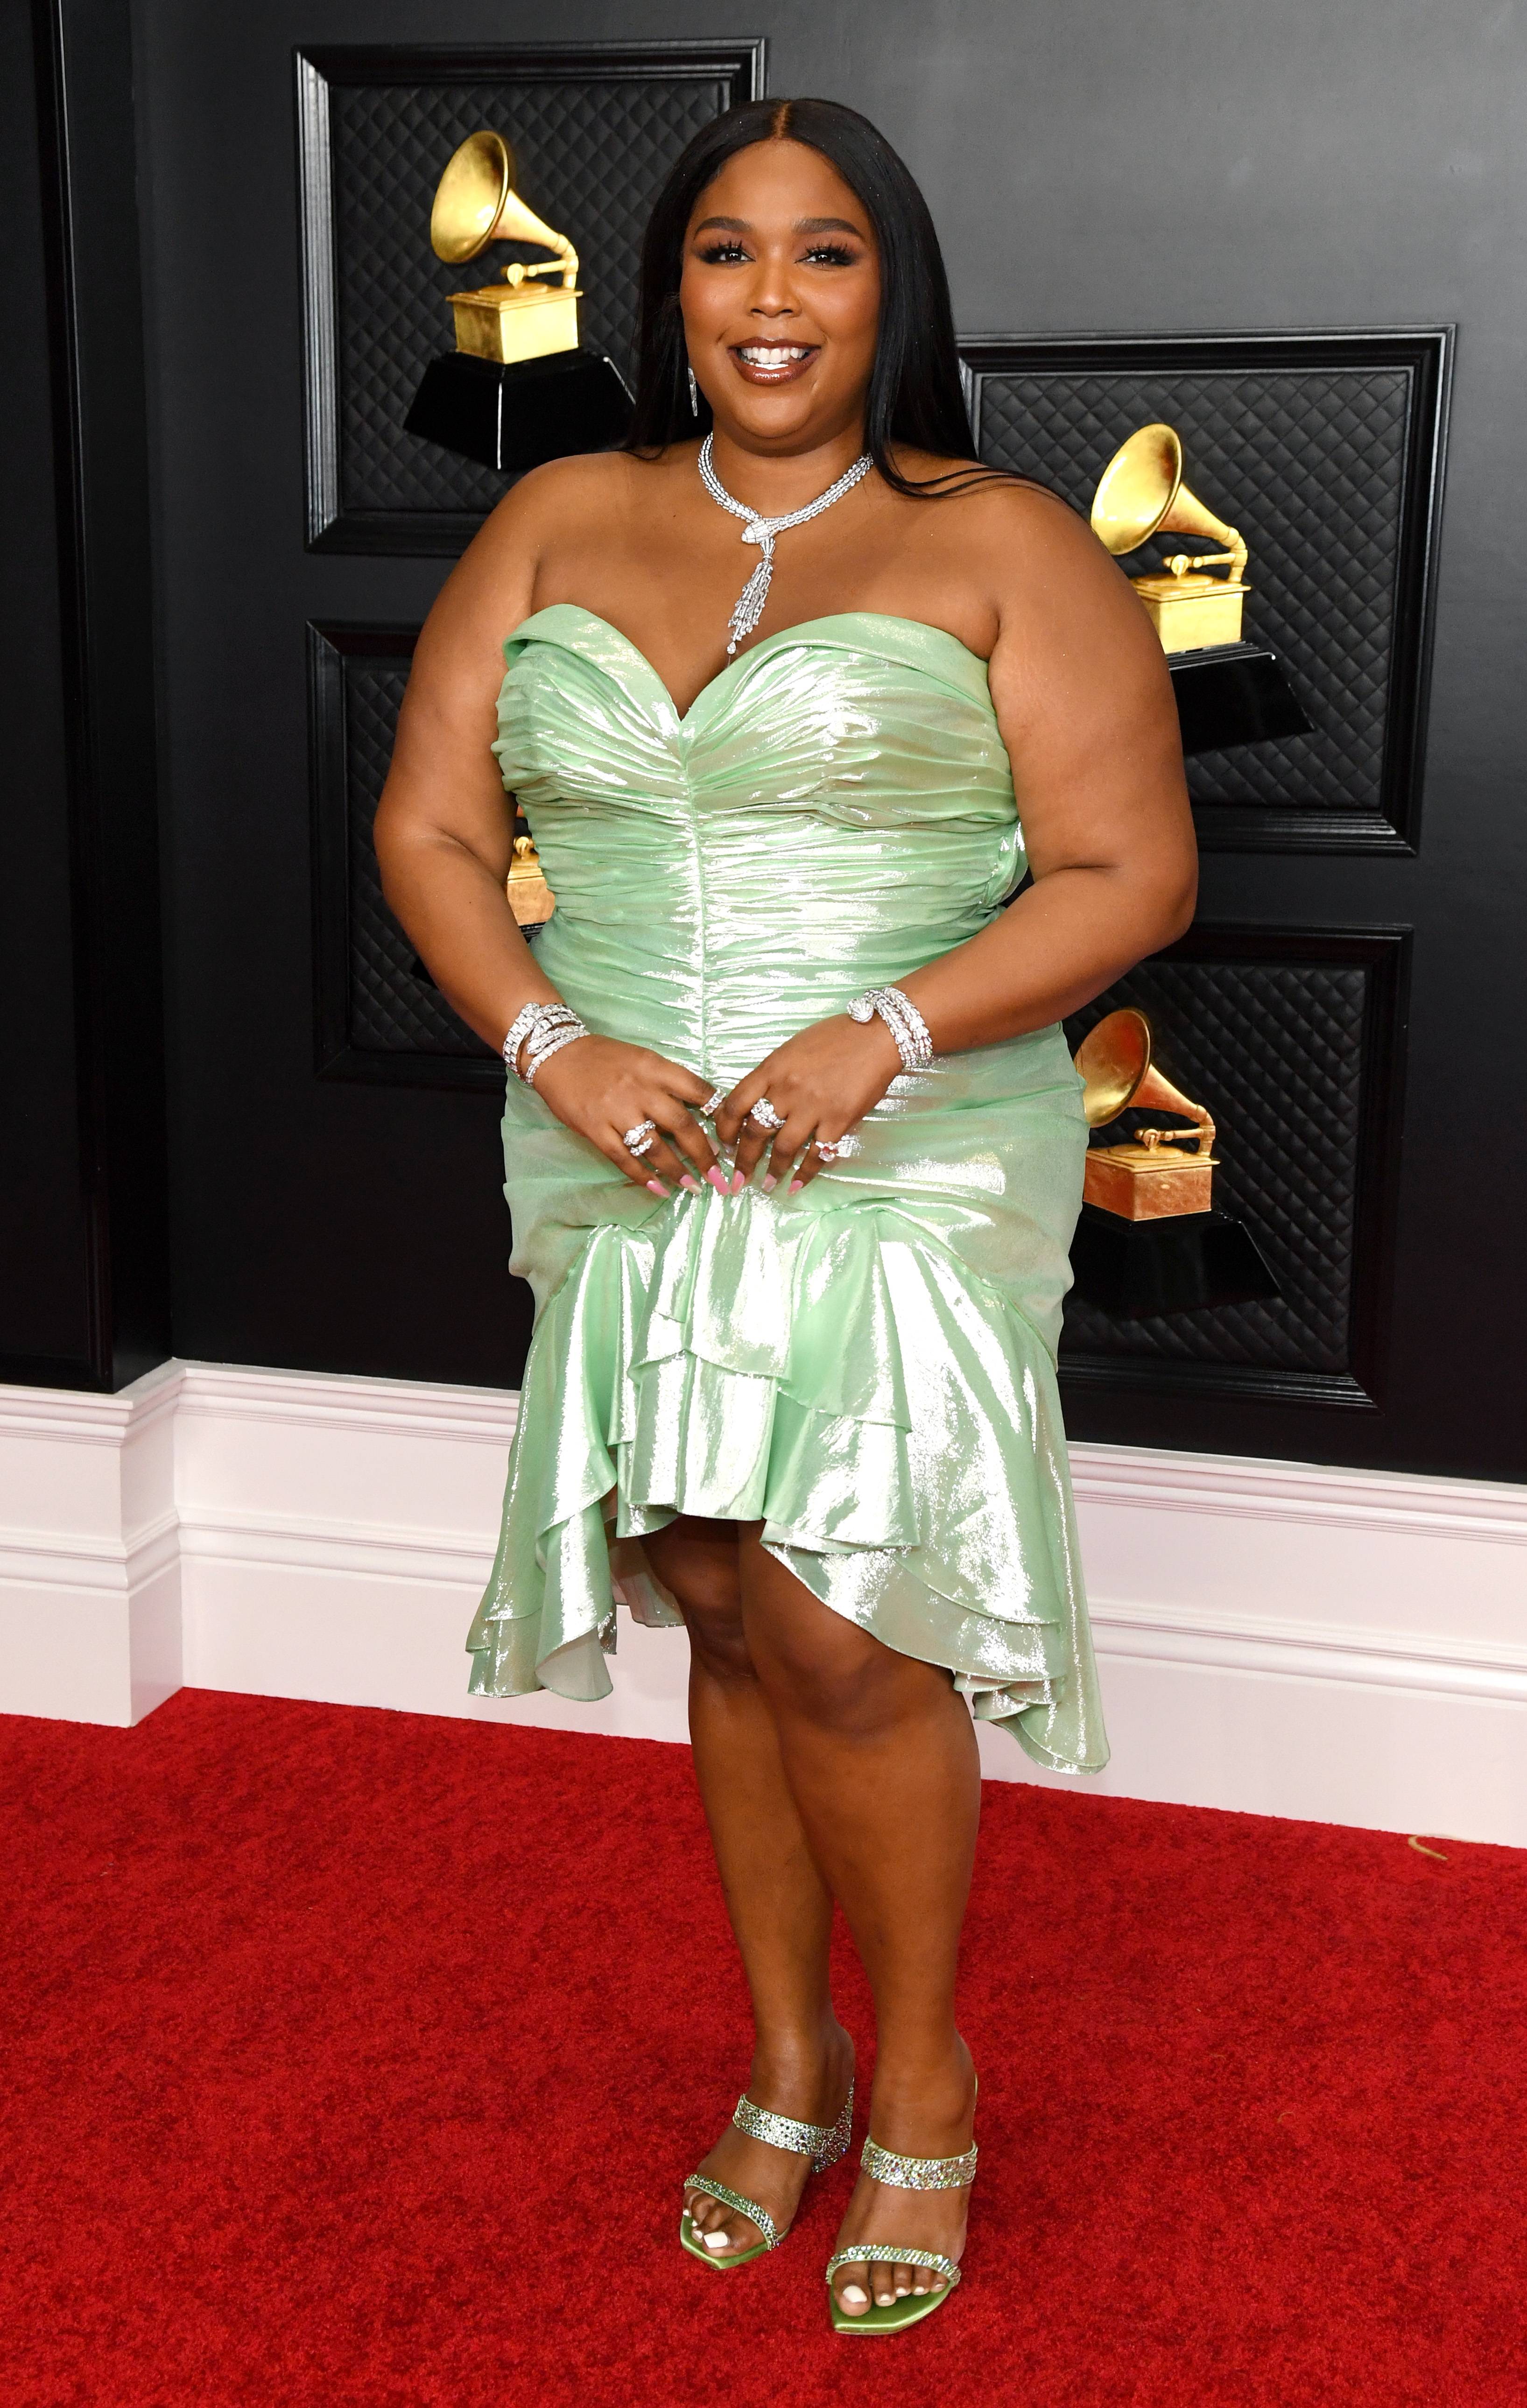 LOS ANGELES, CALIFORNIA - MARCH 14: Lizzo attends the 63rd Annual GRAMMY Awards at Los Angeles Convention Center on March 14, 2021 in Los Angeles, California. (Photo by Kevin Mazur/Getty Images for The Recording Academy )